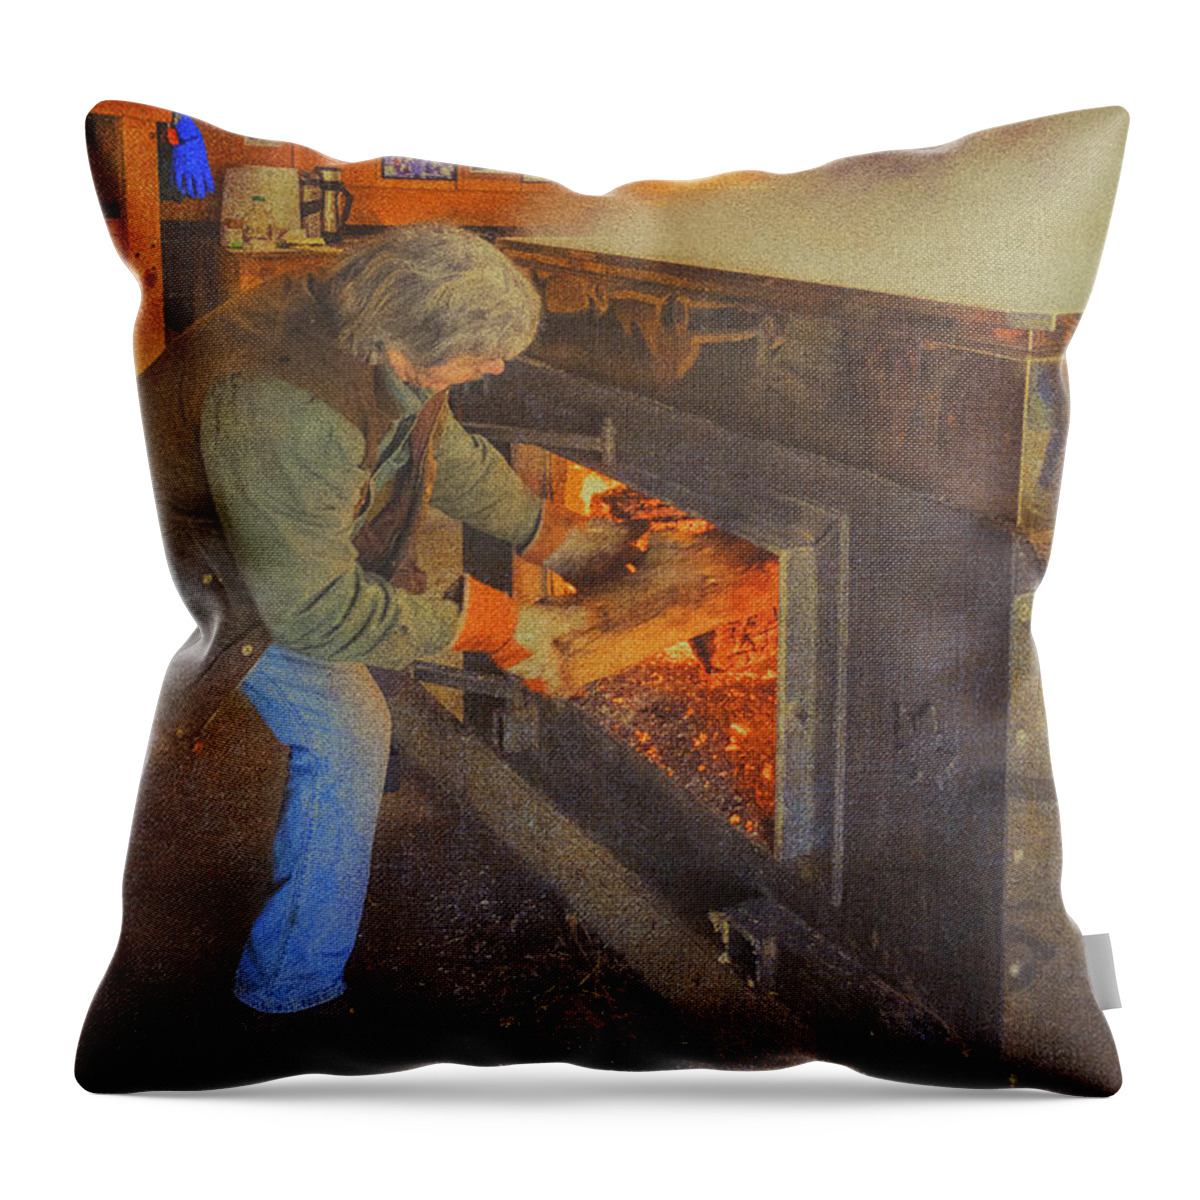 Maple Trees Throw Pillow featuring the photograph Stoking The Sugarhouse by Tom Singleton